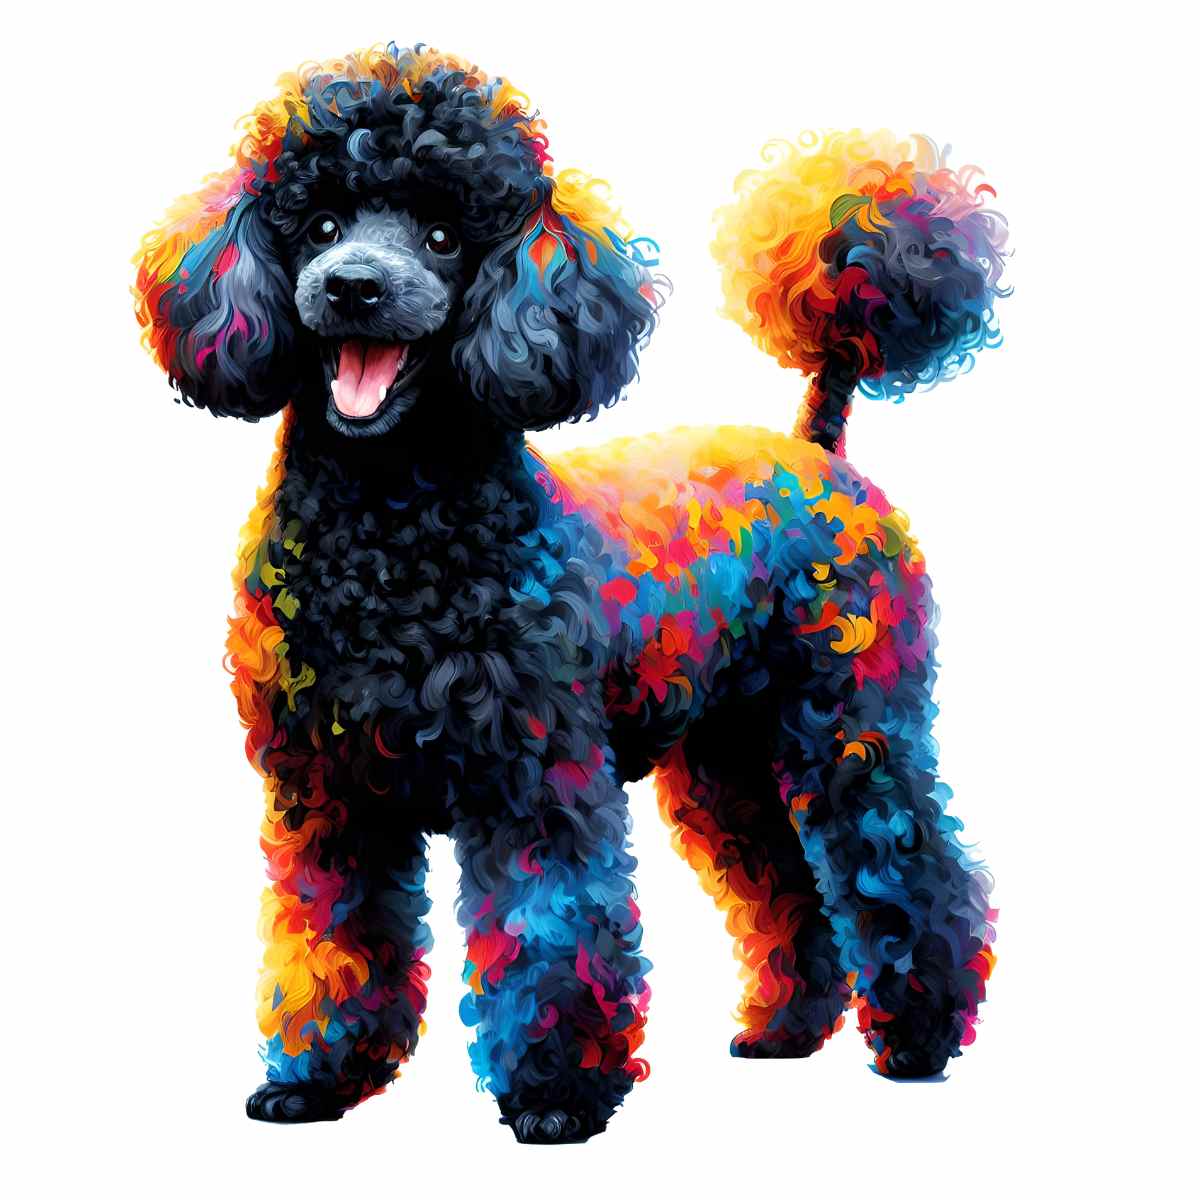 Animal Jigsaw Puzzle > Wooden Jigsaw Puzzle > Jigsaw Puzzle A4 Black Poodle Dog - Jigsaw Puzzle